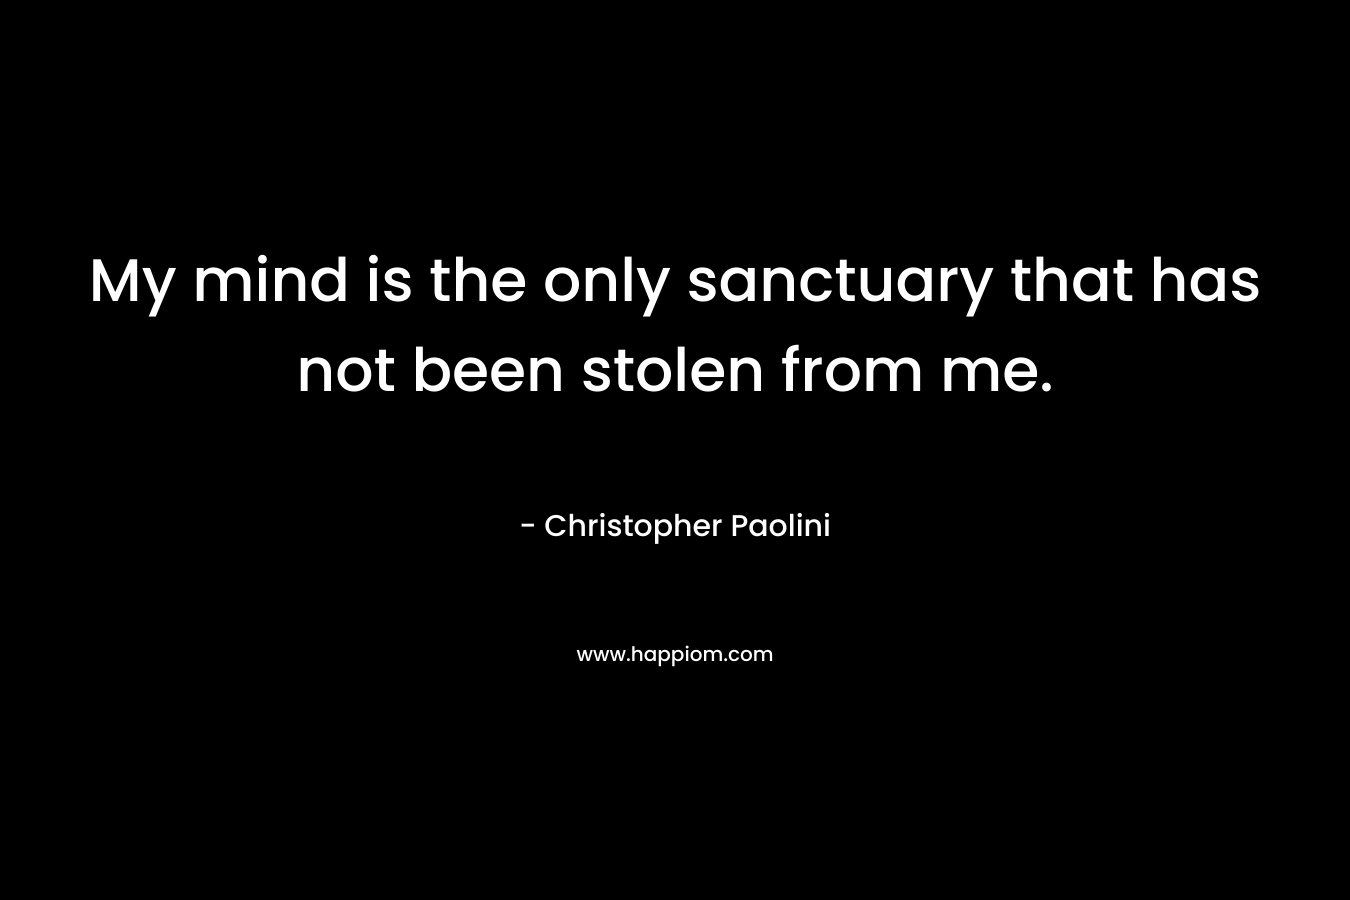 My mind is the only sanctuary that has not been stolen from me.